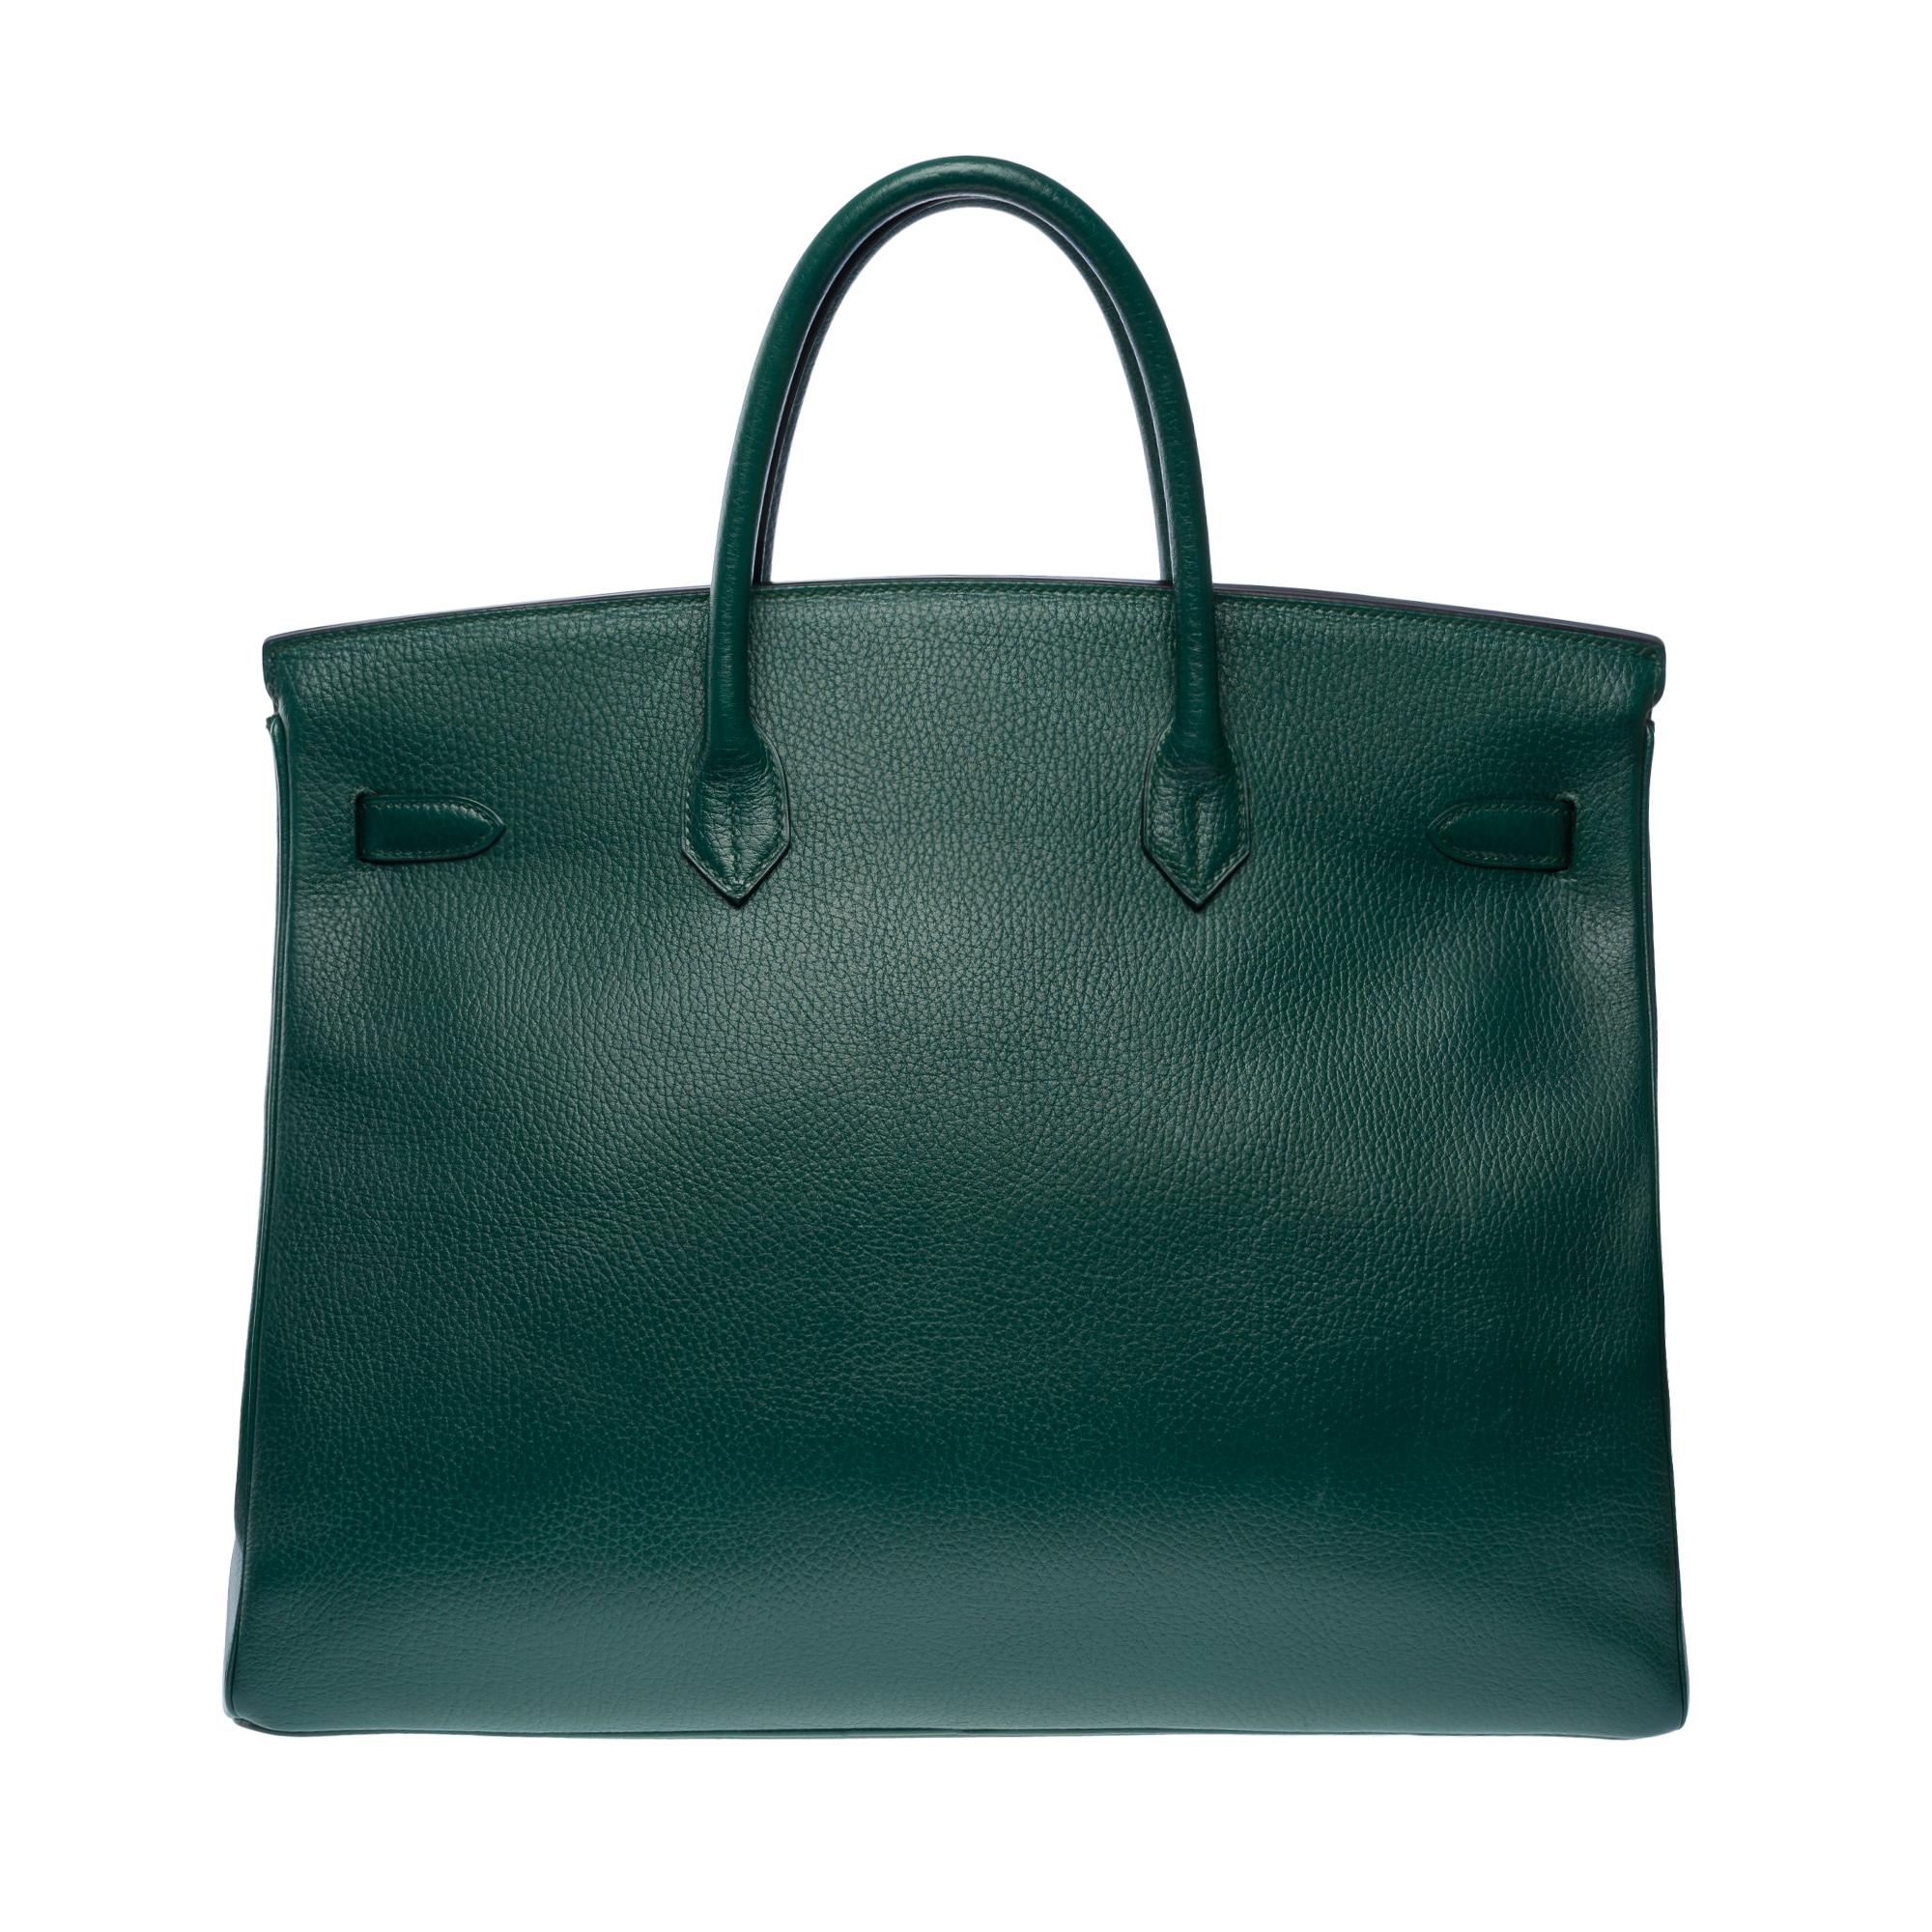 Beautiful Hermes Birkin 40 handbag in Emerald green Ardennes Calf leather , gold plated metal hardware, double handle in green leather for a hand carry

Flap closure
Inner lining in green leather, one zipped pocket, one patch pocket
Signature :